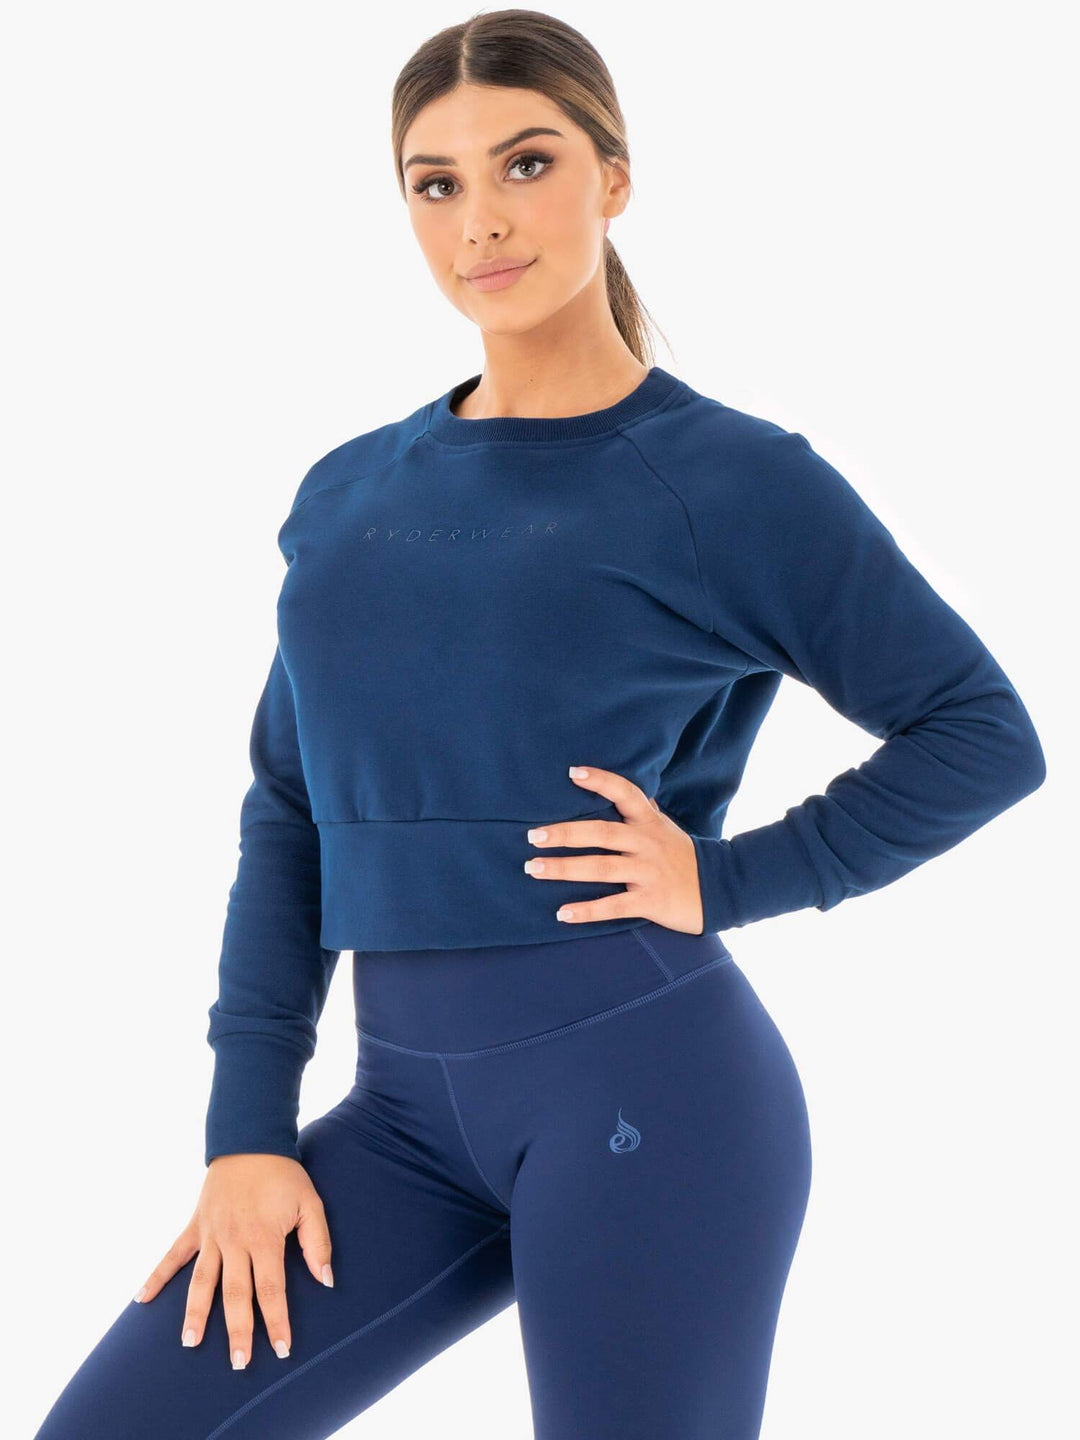 Motion Sweater - Navy Clothing Ryderwear 